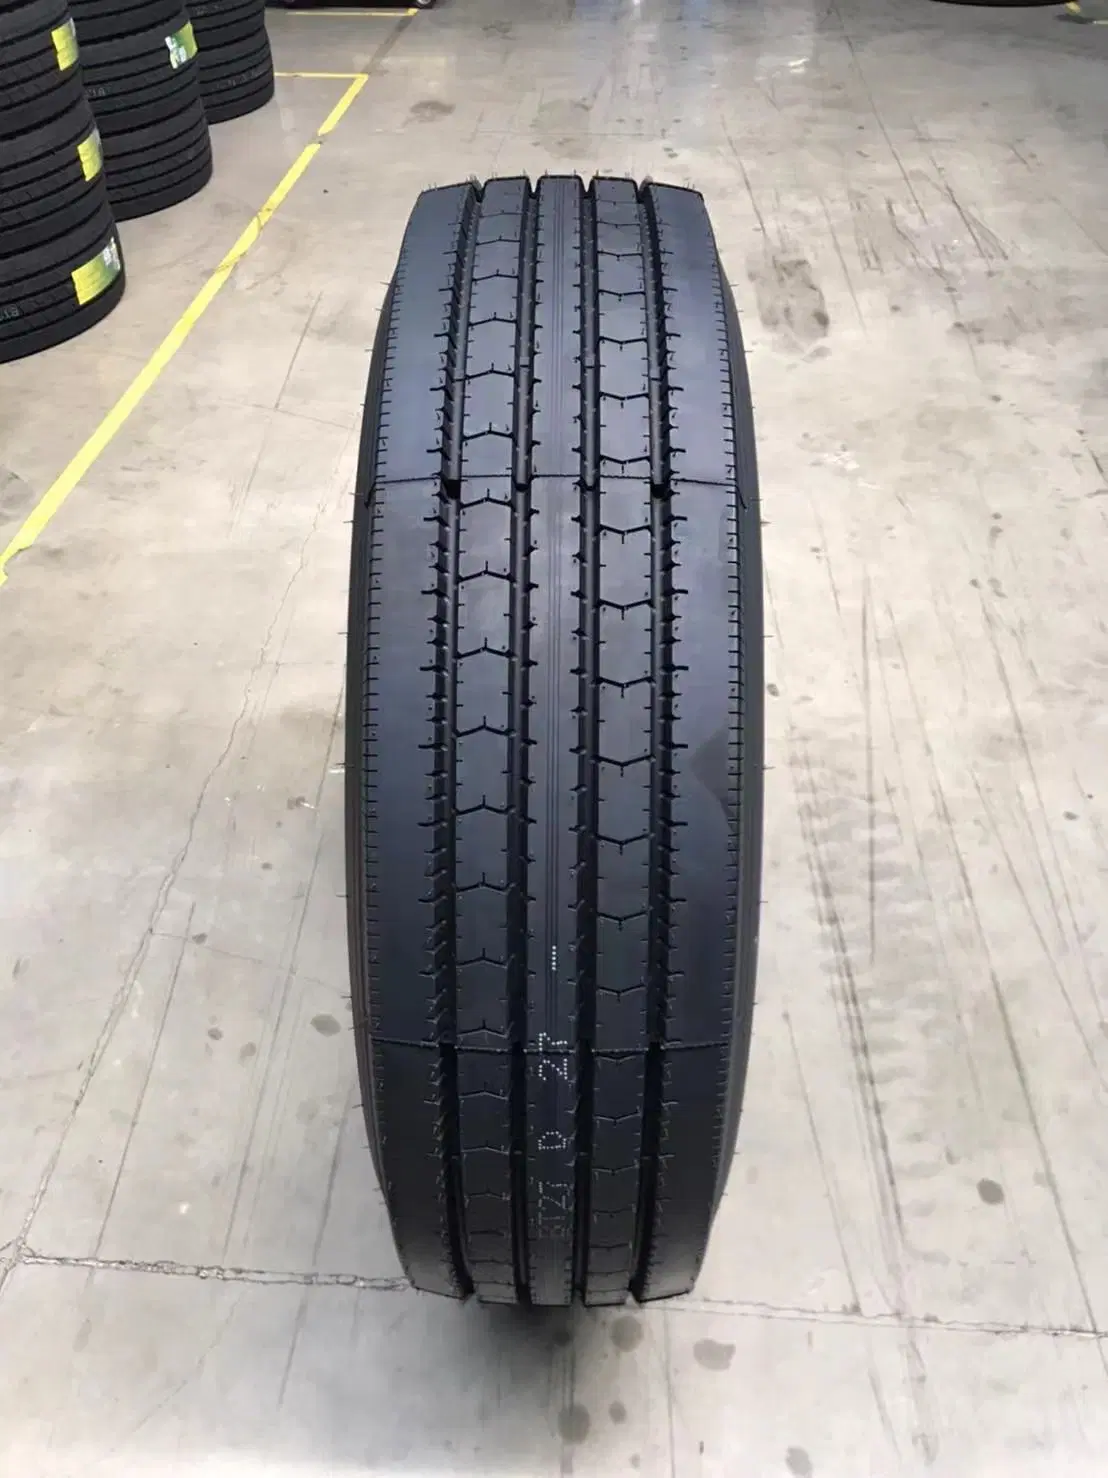 Inner Tube truck TBR OTR tyres rib pattern low pressure mixed pavement tire with superb wear resistant and heat dissipation competitive price high quality tires